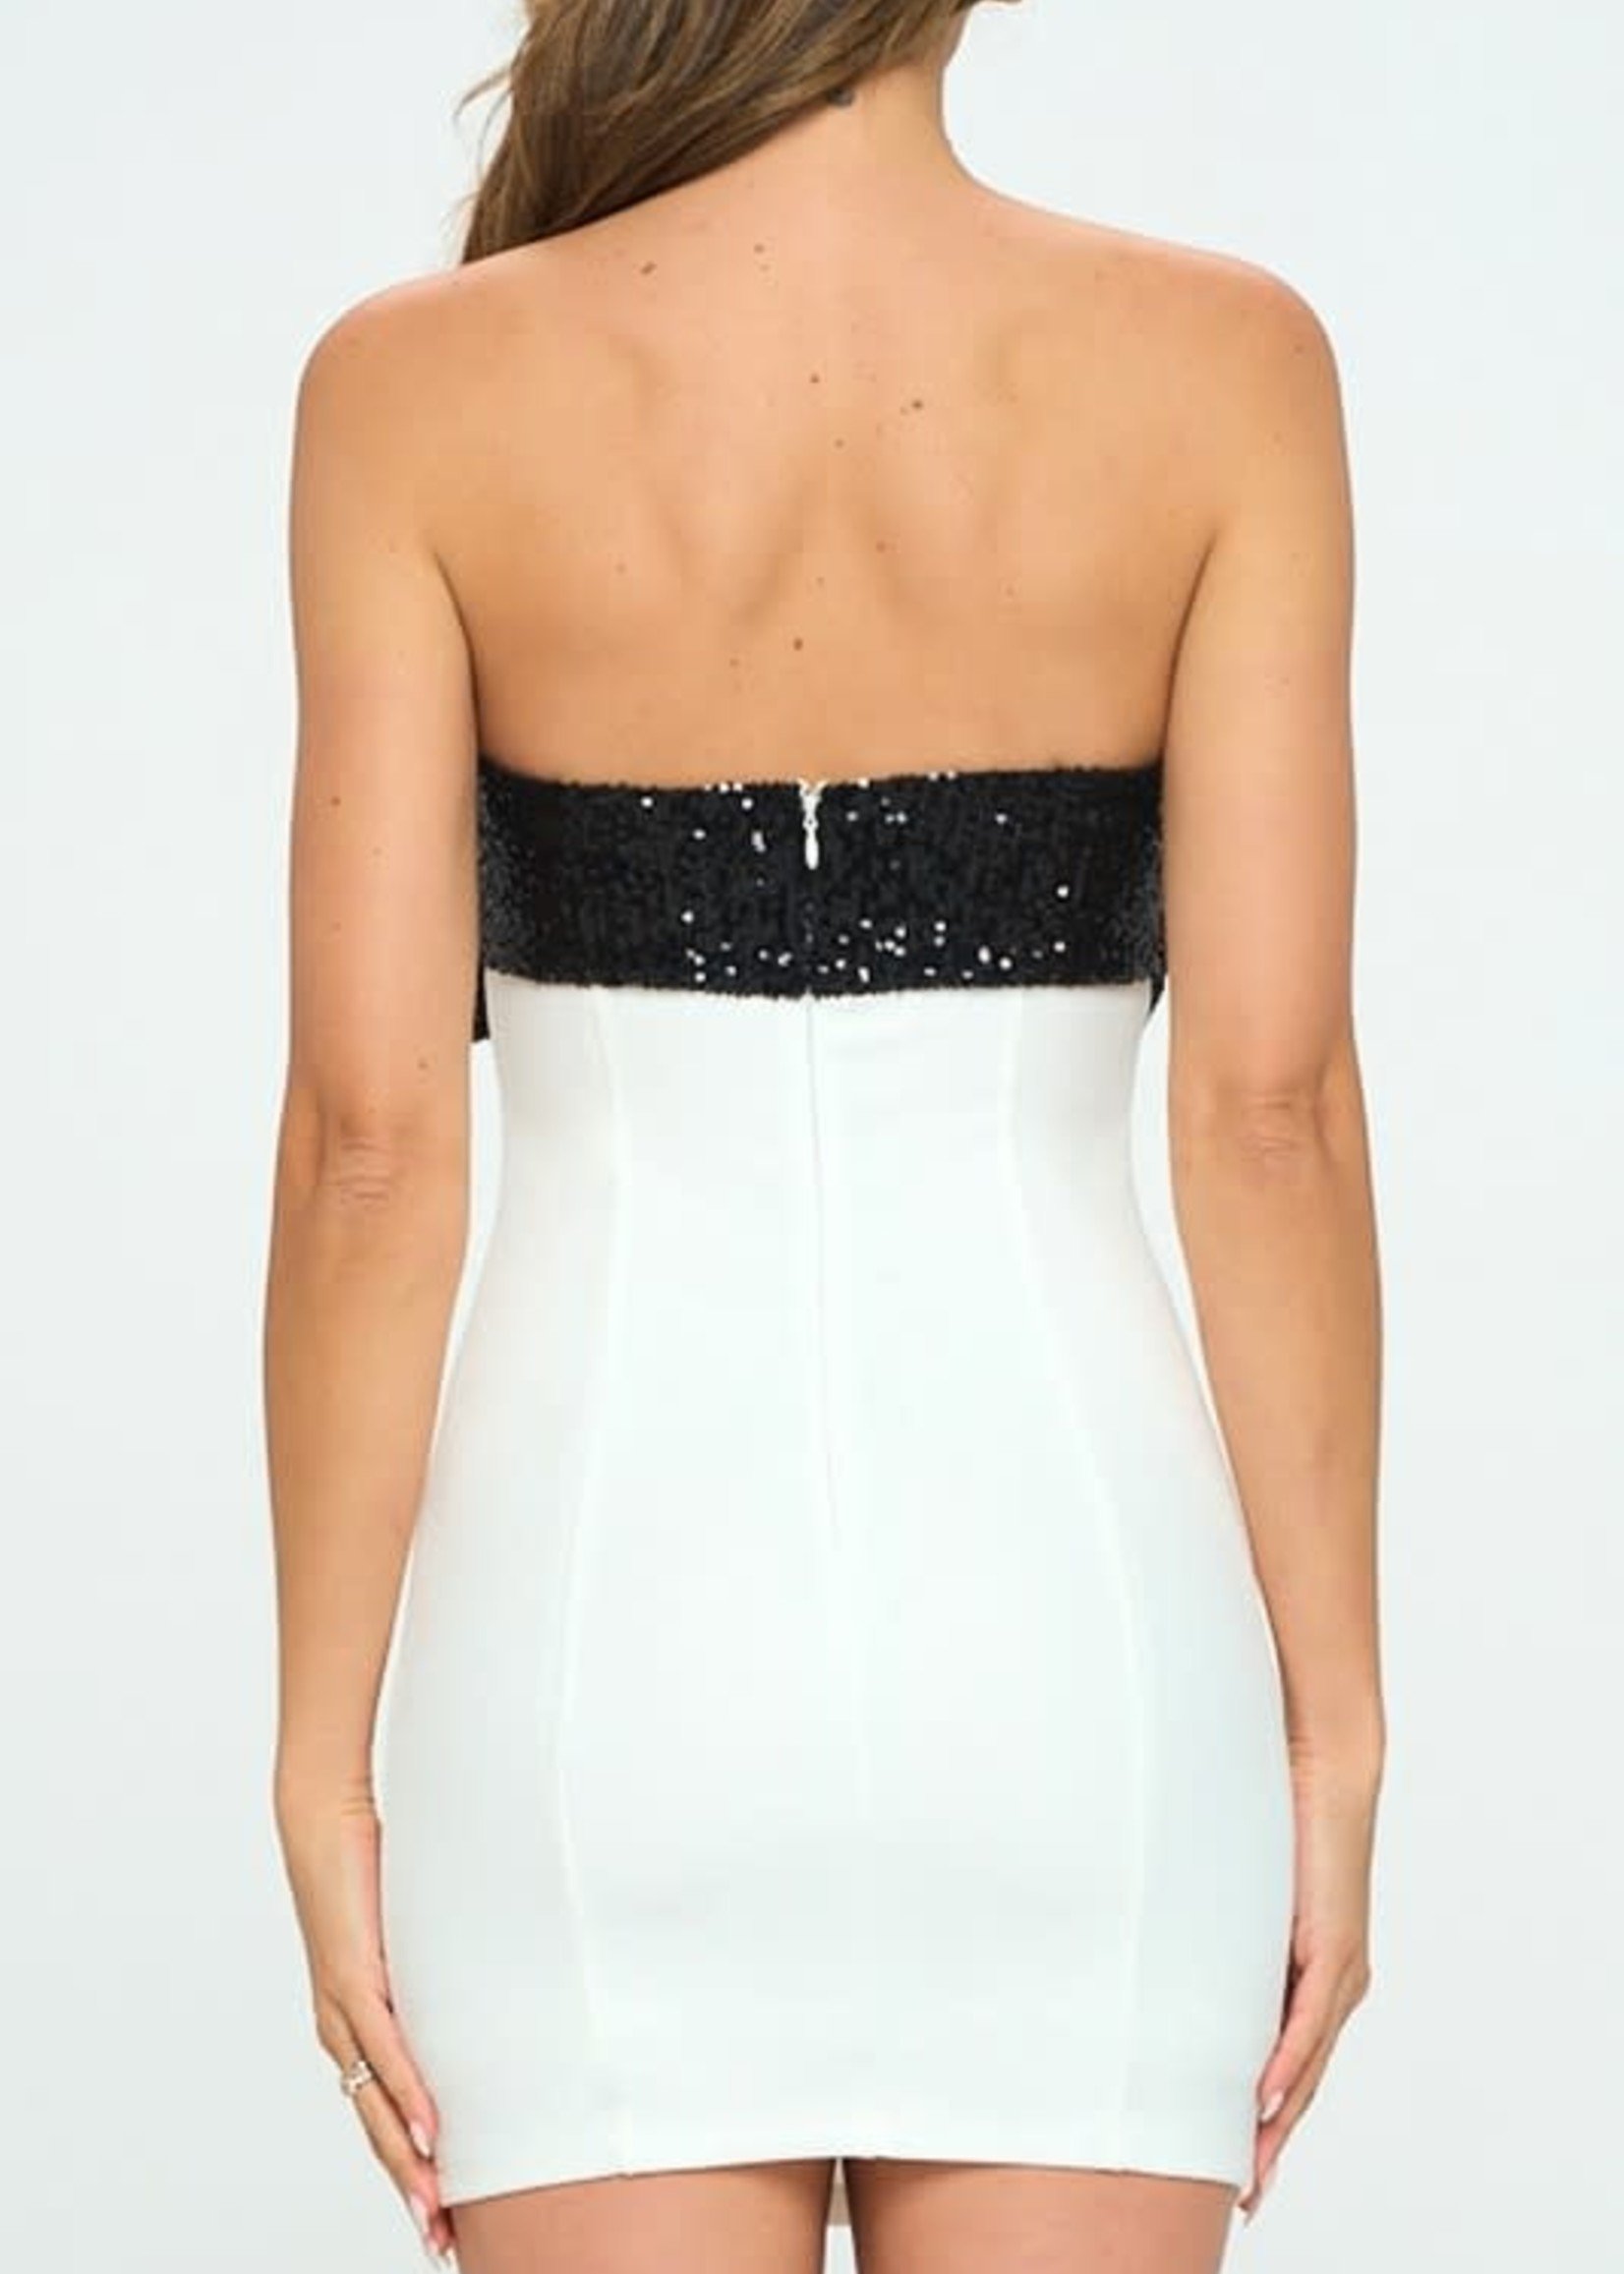 Black and White Party Dress